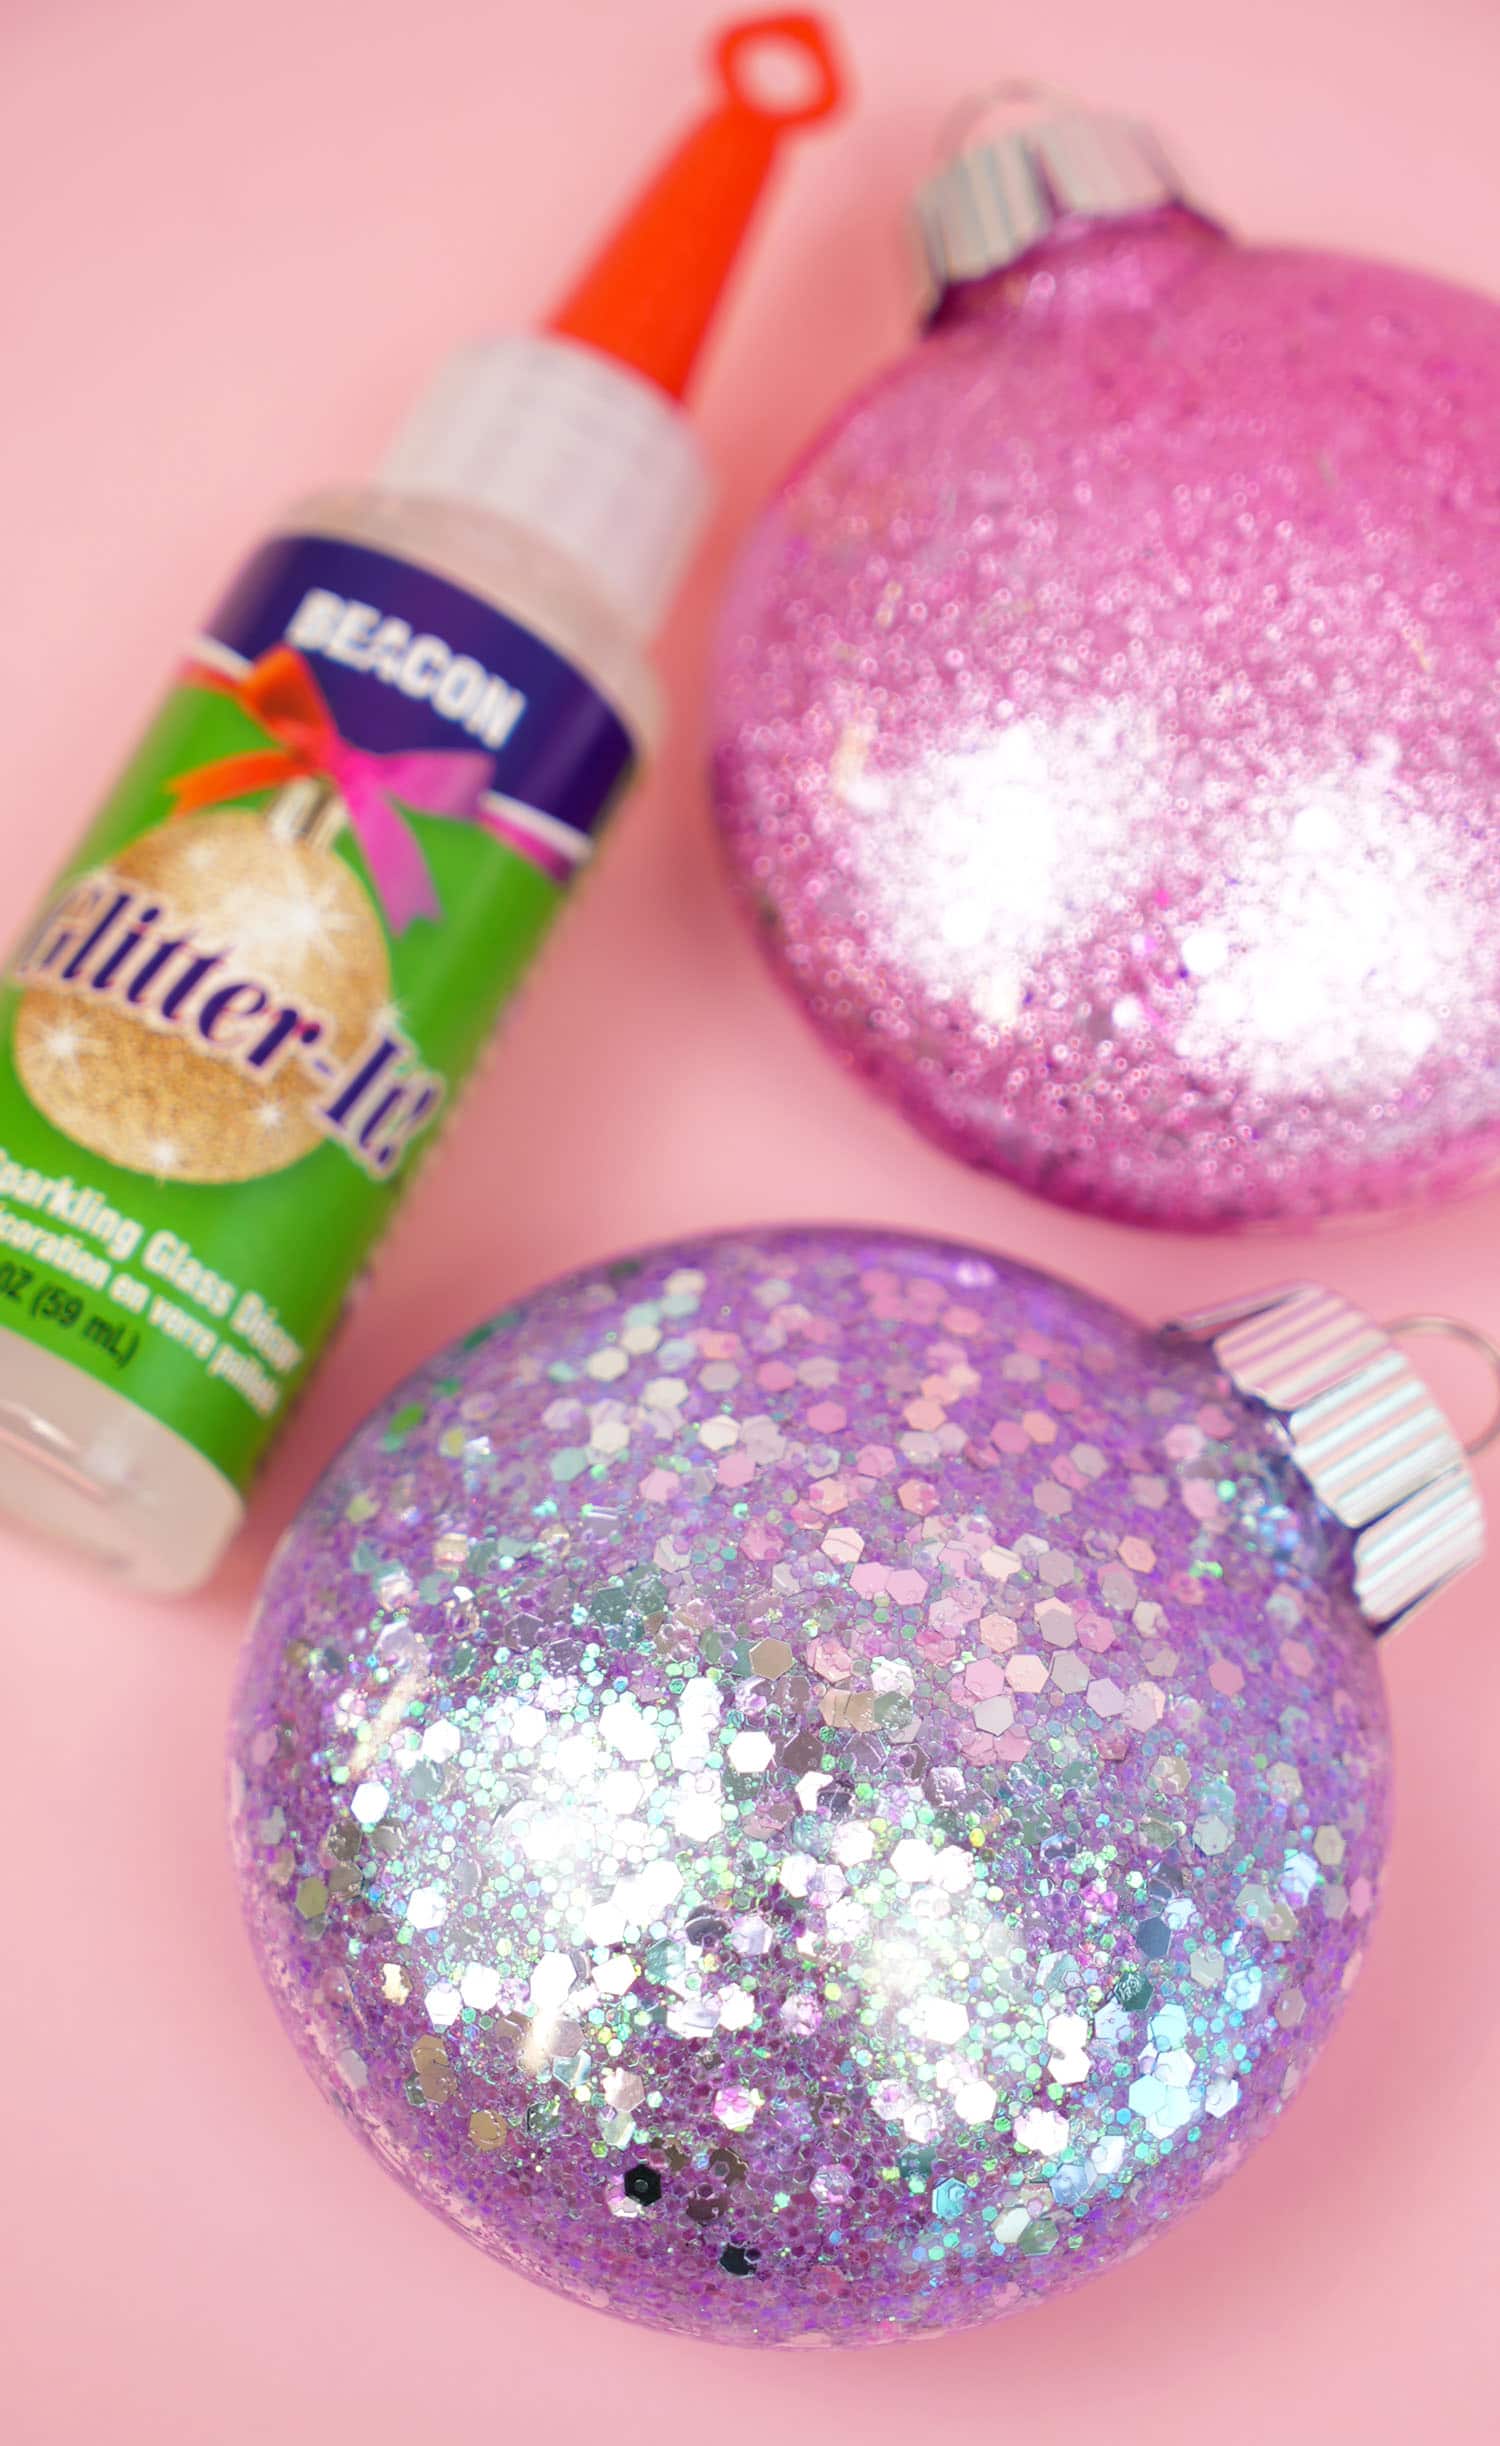 Glitter ornament help! I used watered down mod podge and for some